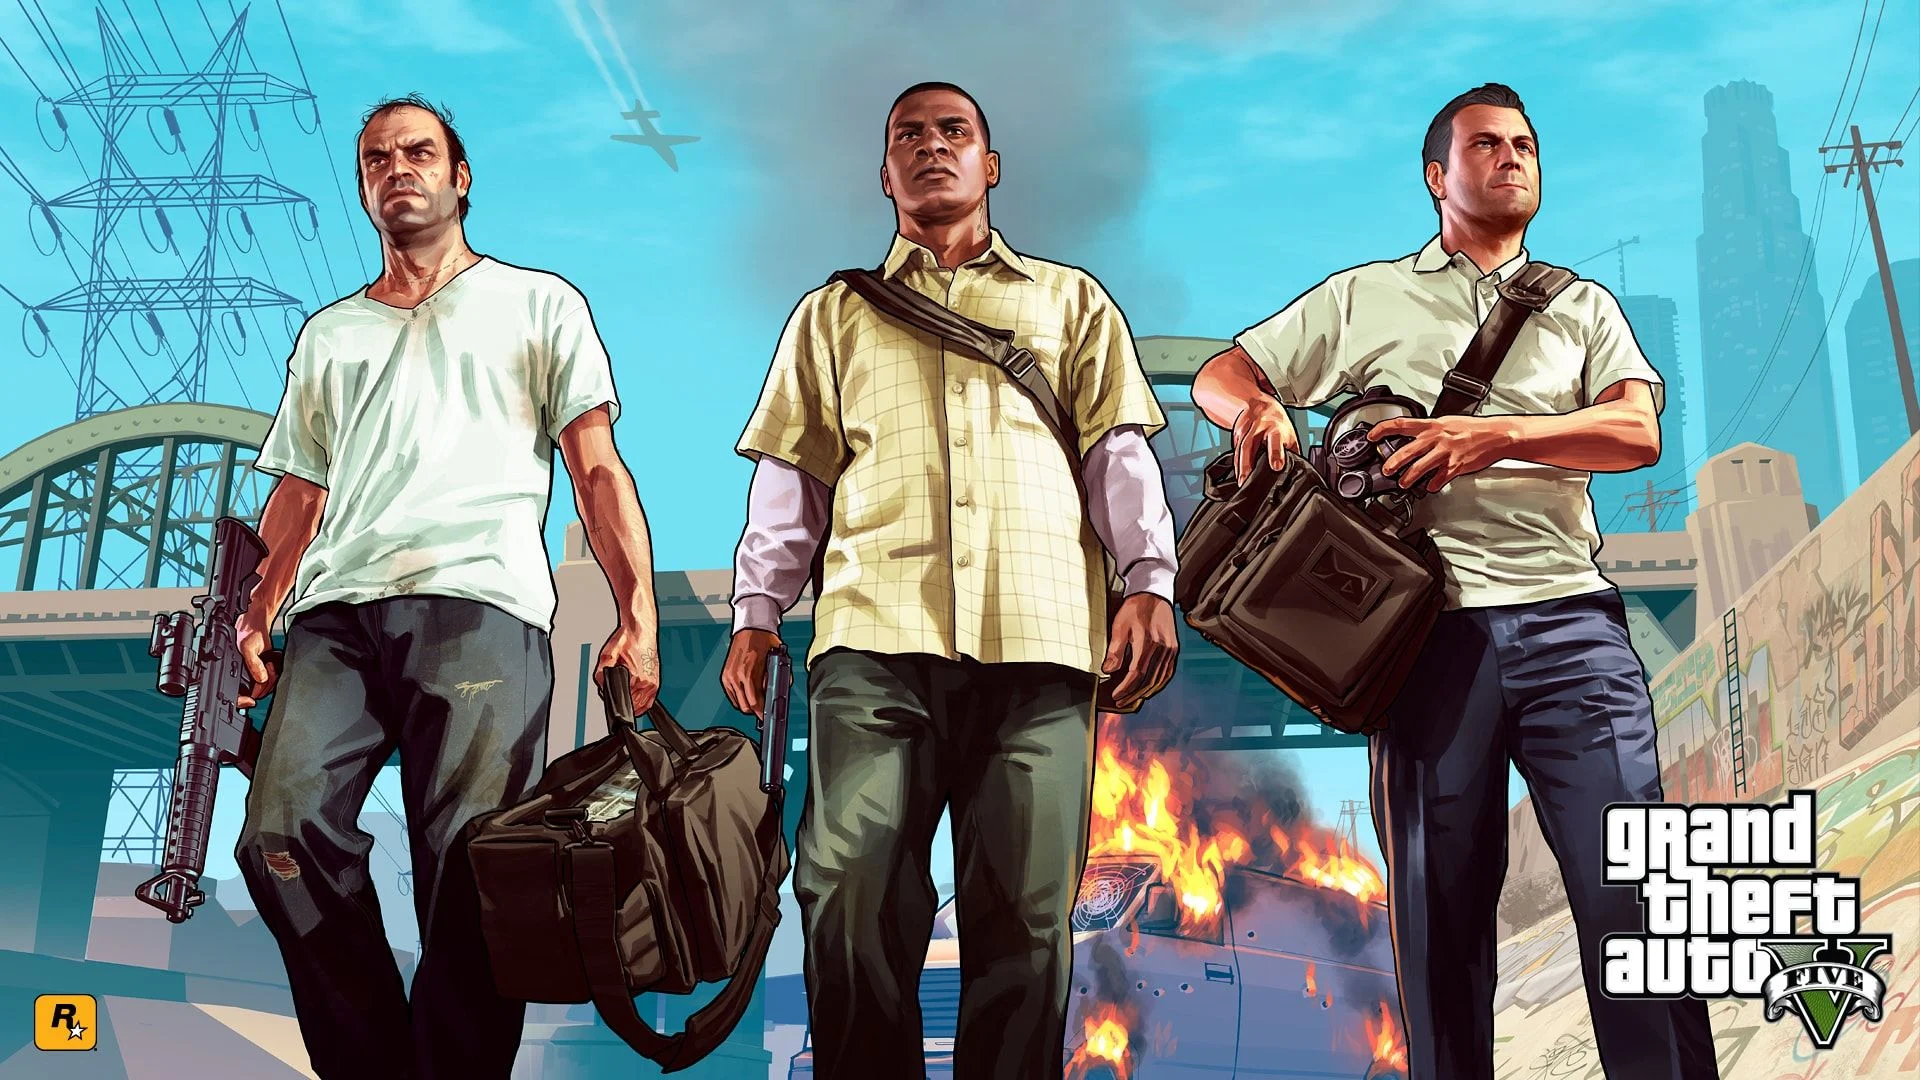 Splash art with the game's title in the bottom right corner. Three men with weapons and bags of money, escaping from a heist, with an exploding van in the background